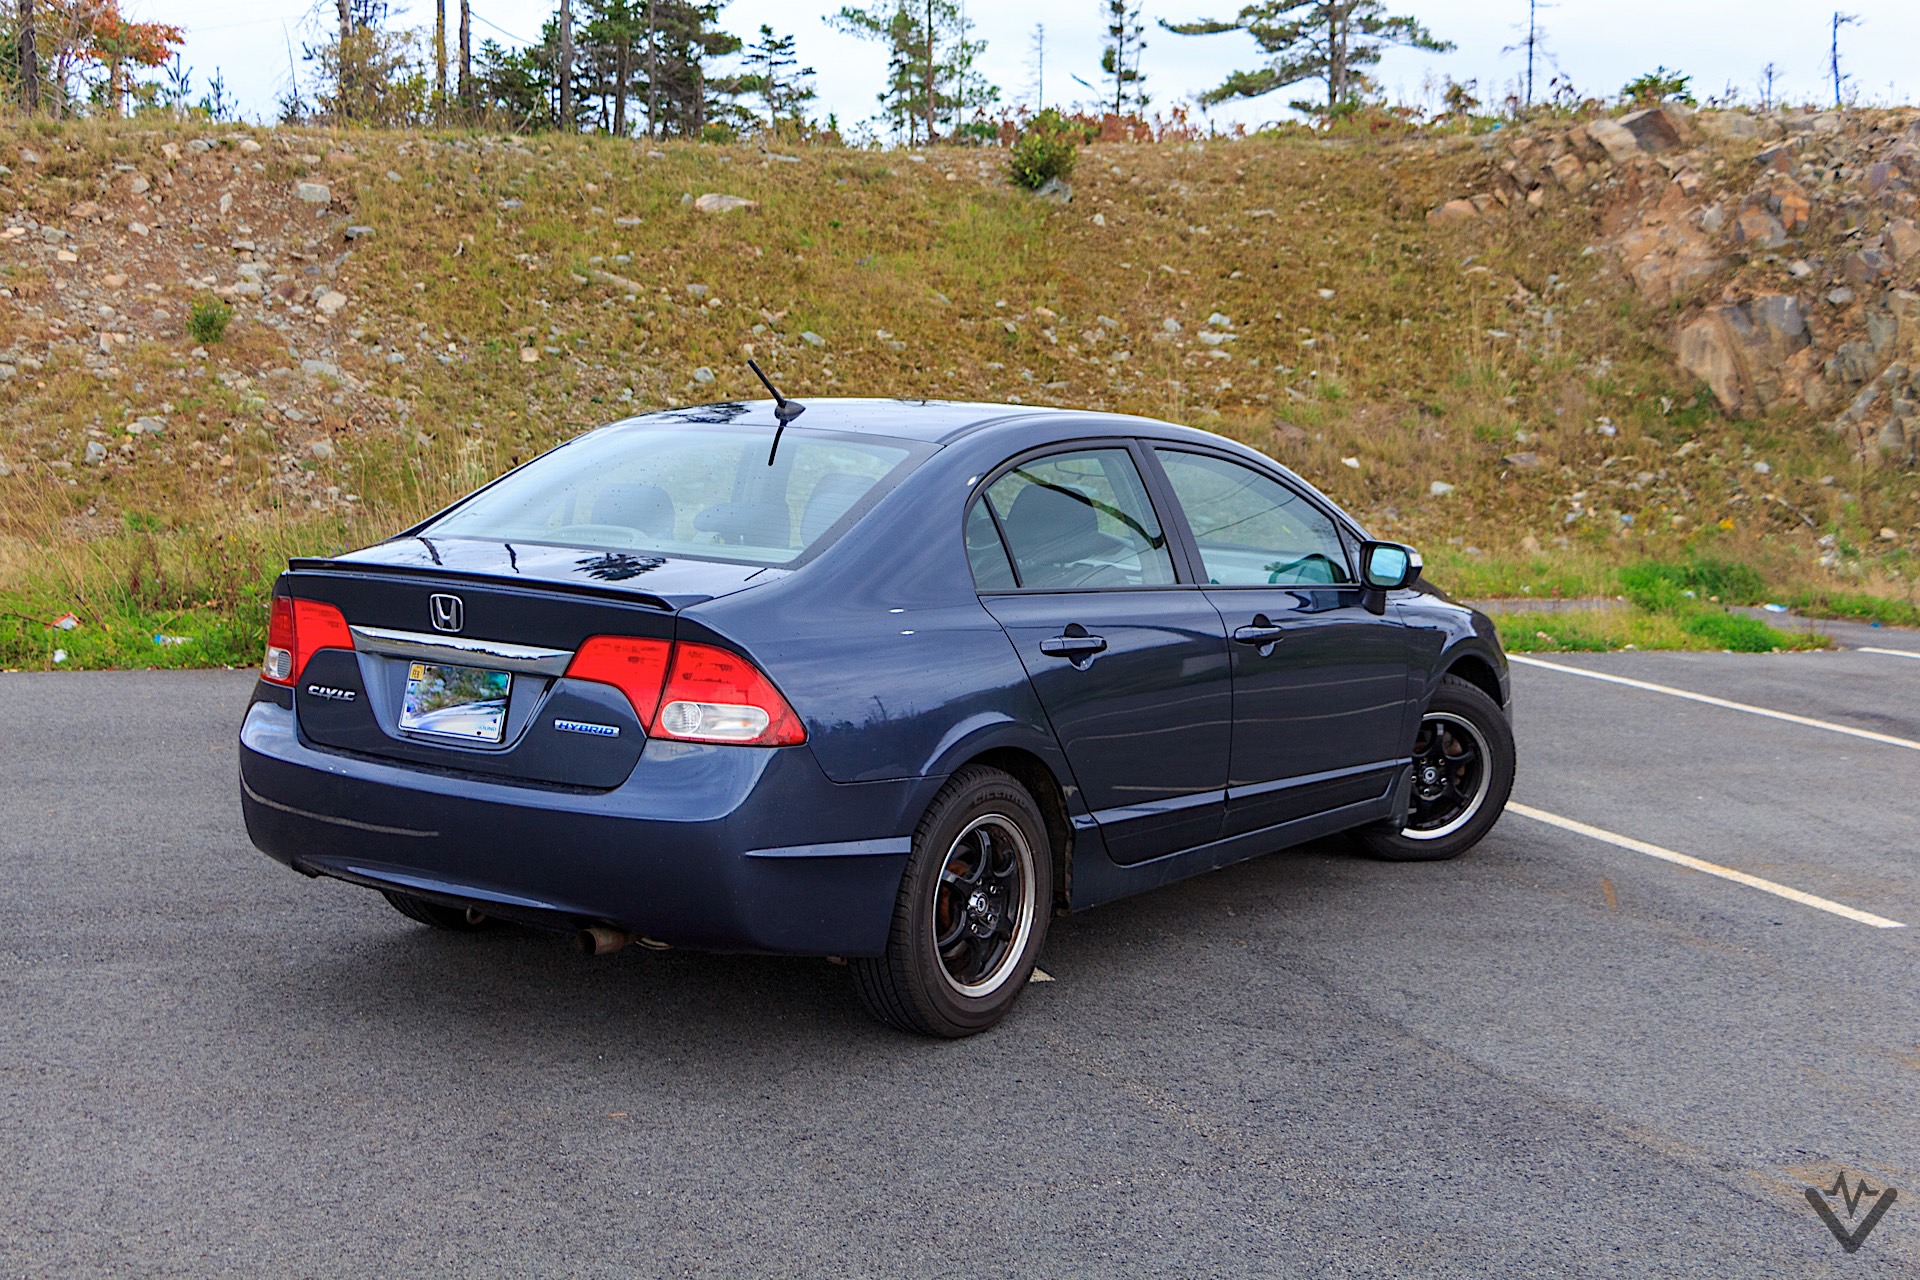 Going the distance: 200,000 miles in a 2009 Honda Civic Hybrid, one of the  worst hybrids made - EV Pulse